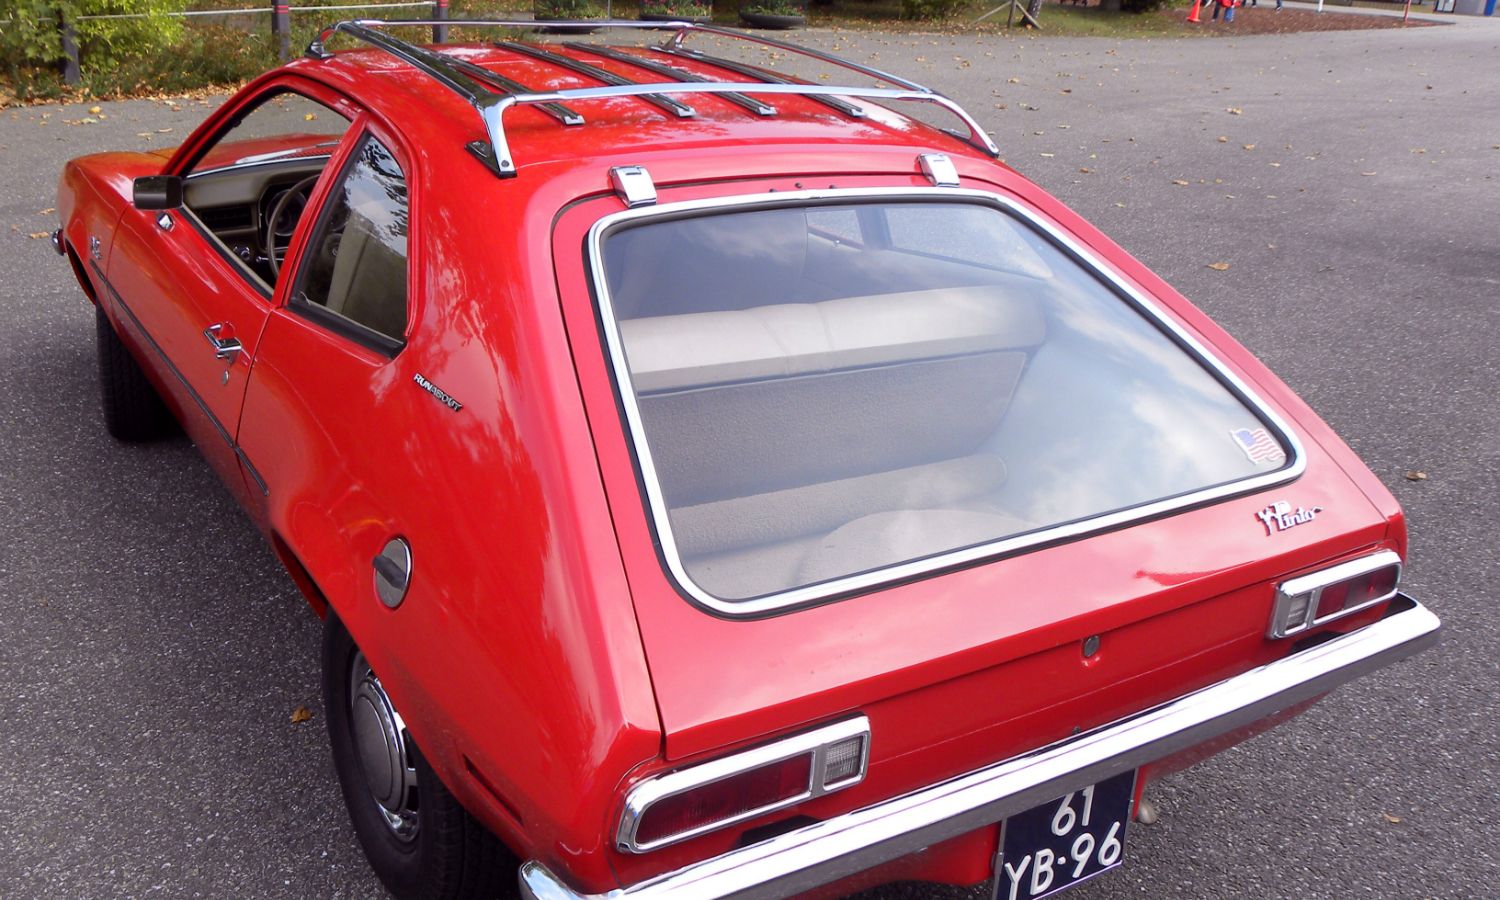 Ford pinto lawsuit case #3